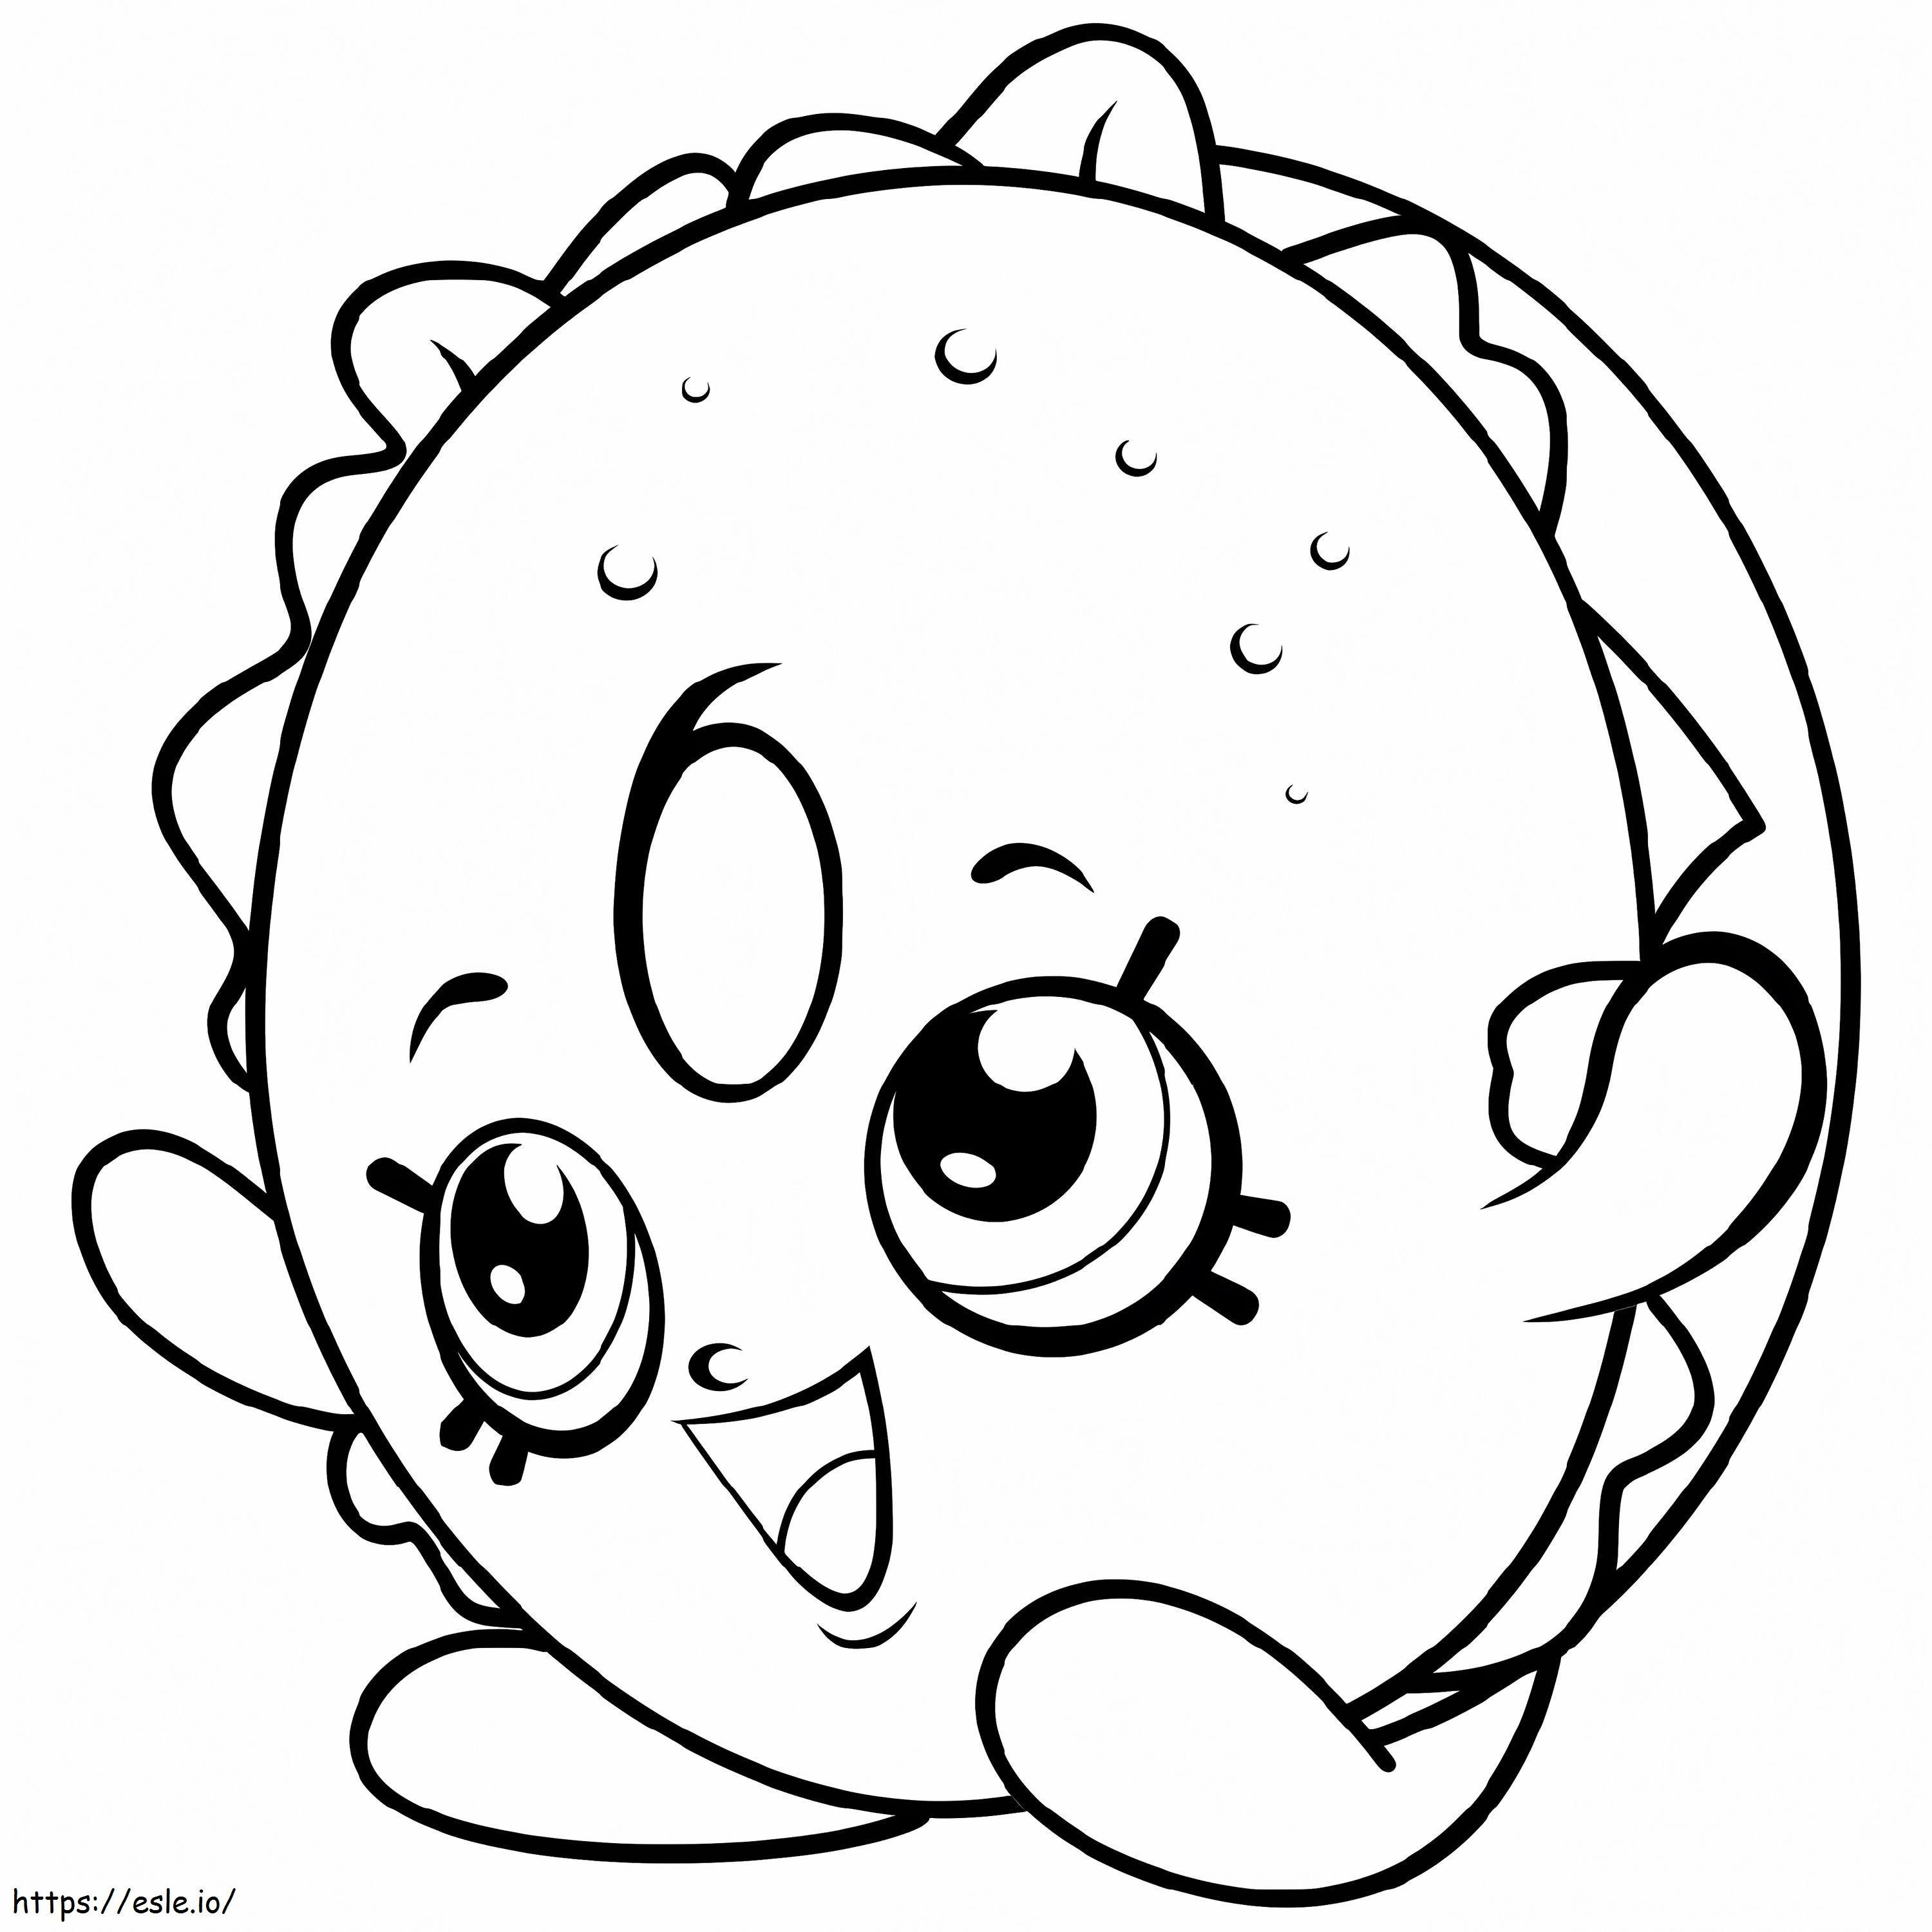 Bagel Billy Shopkin coloring page